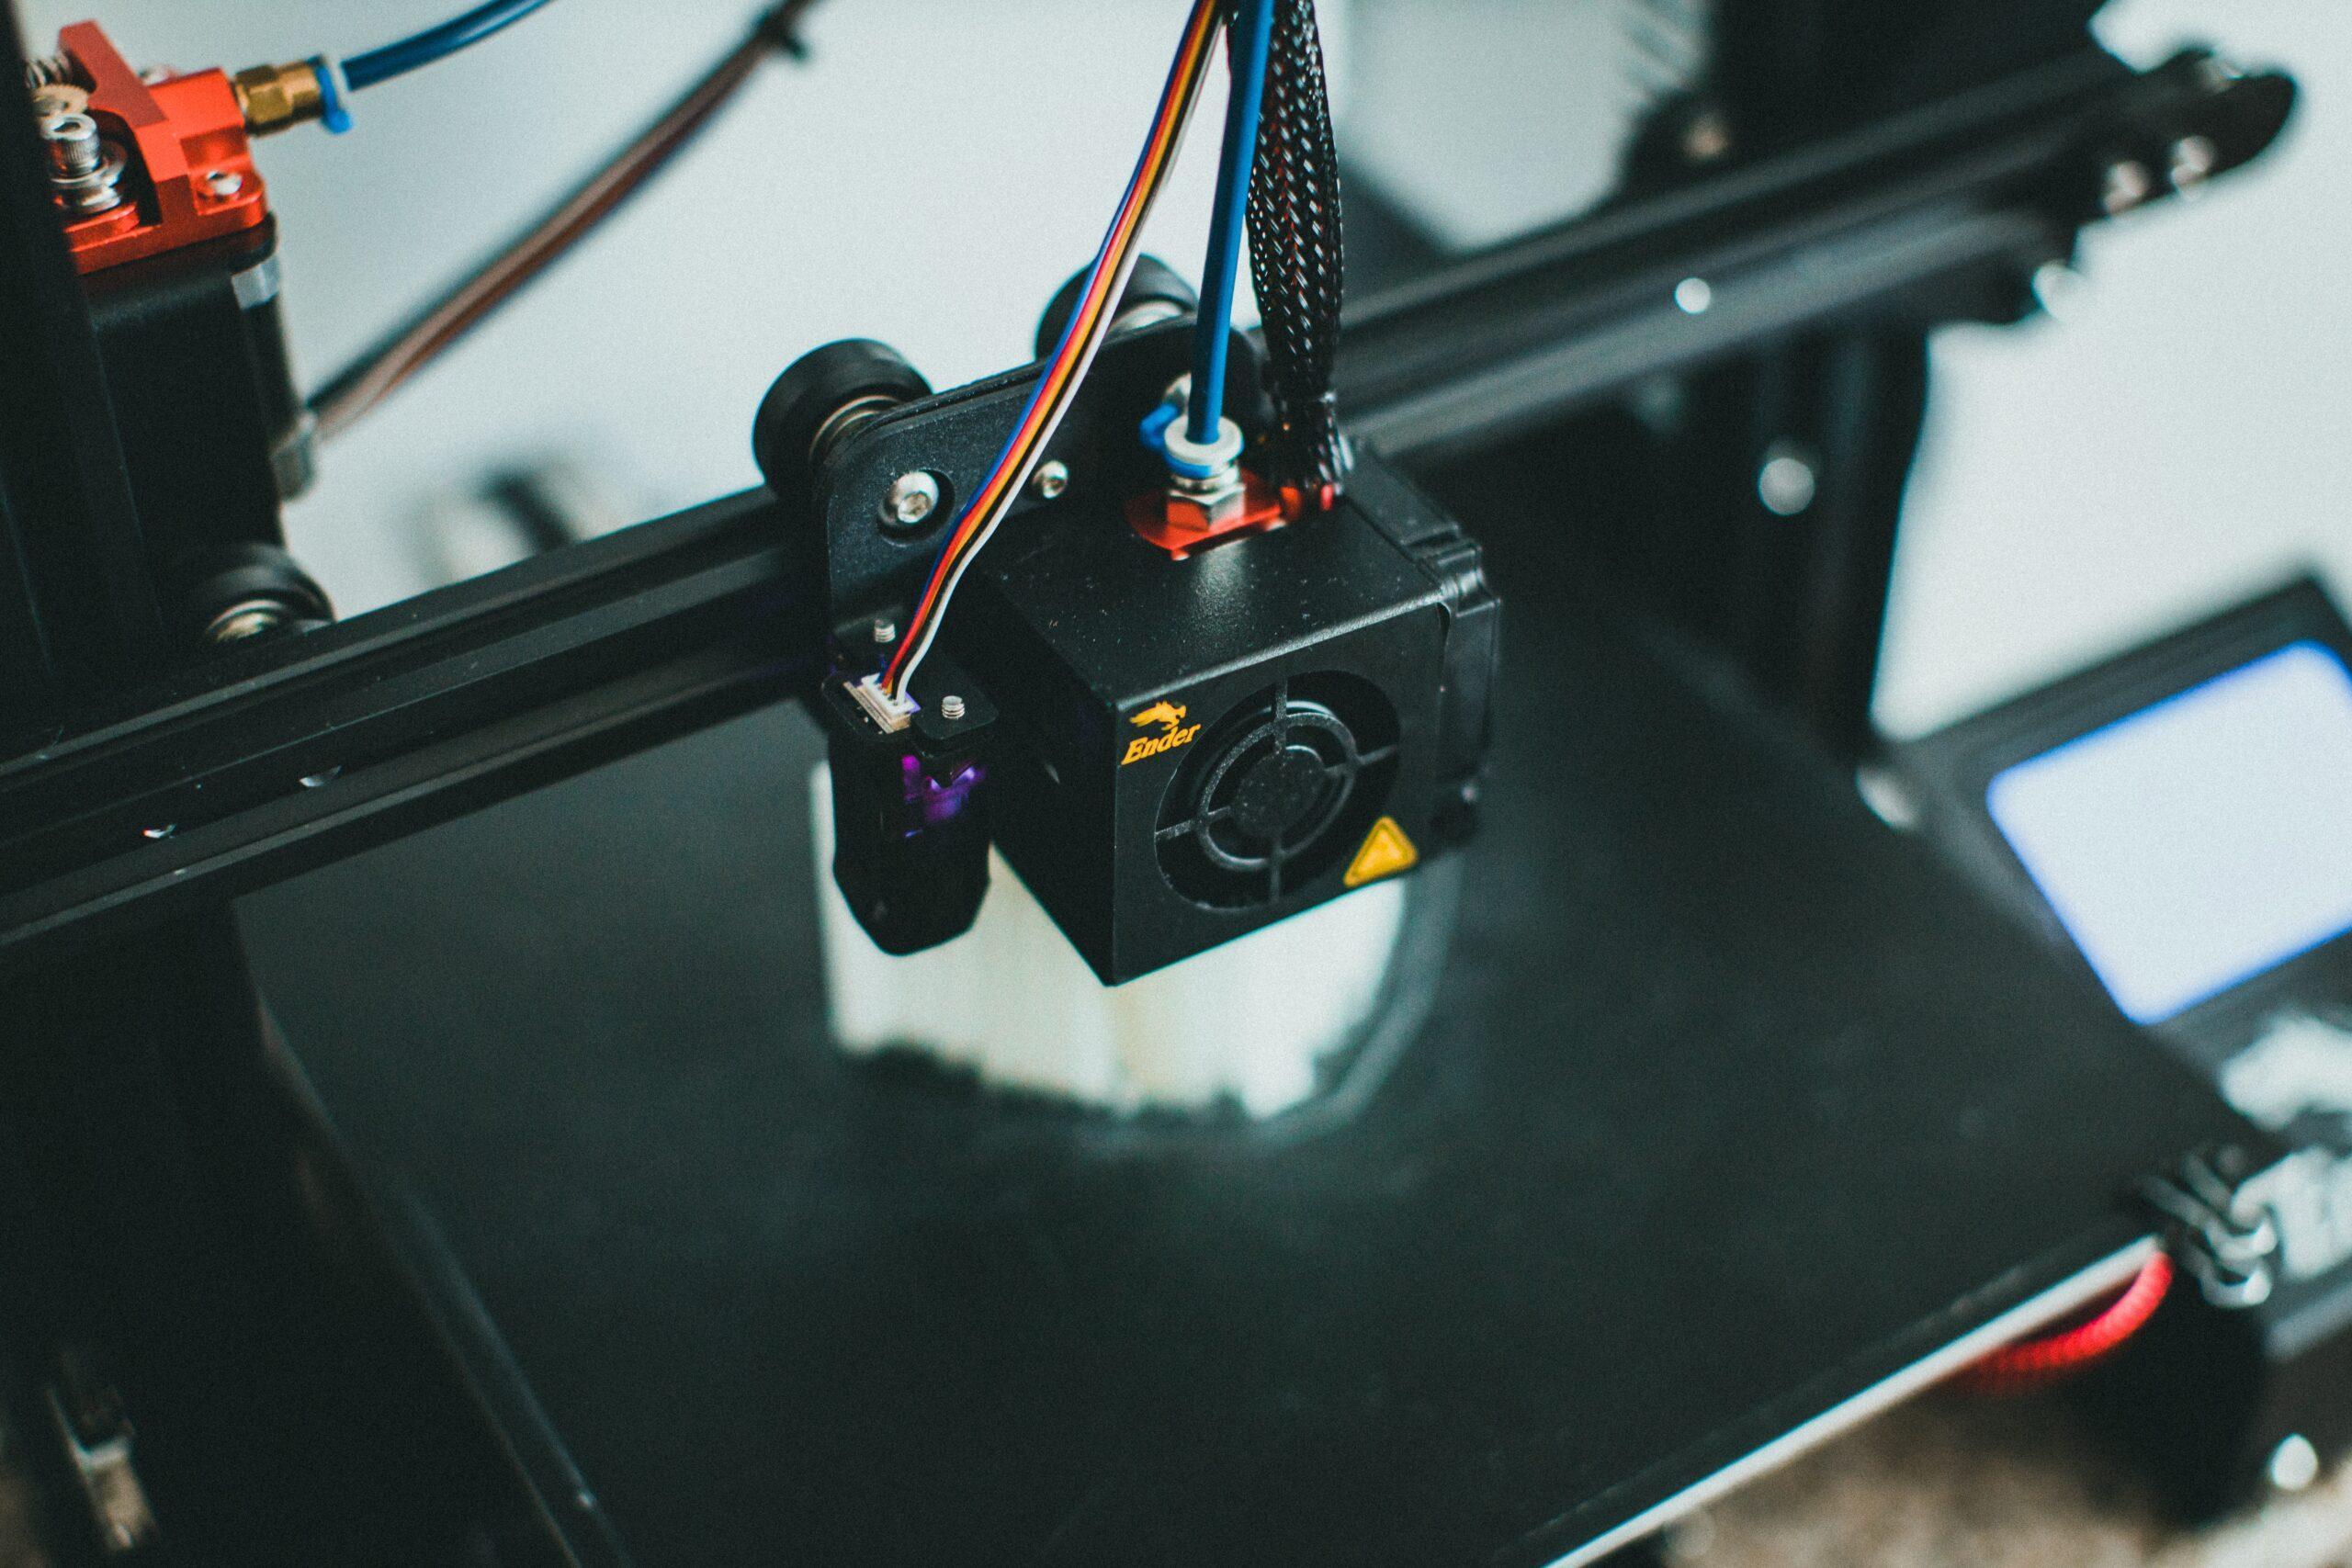 Photo of a 3D printer printing out an object